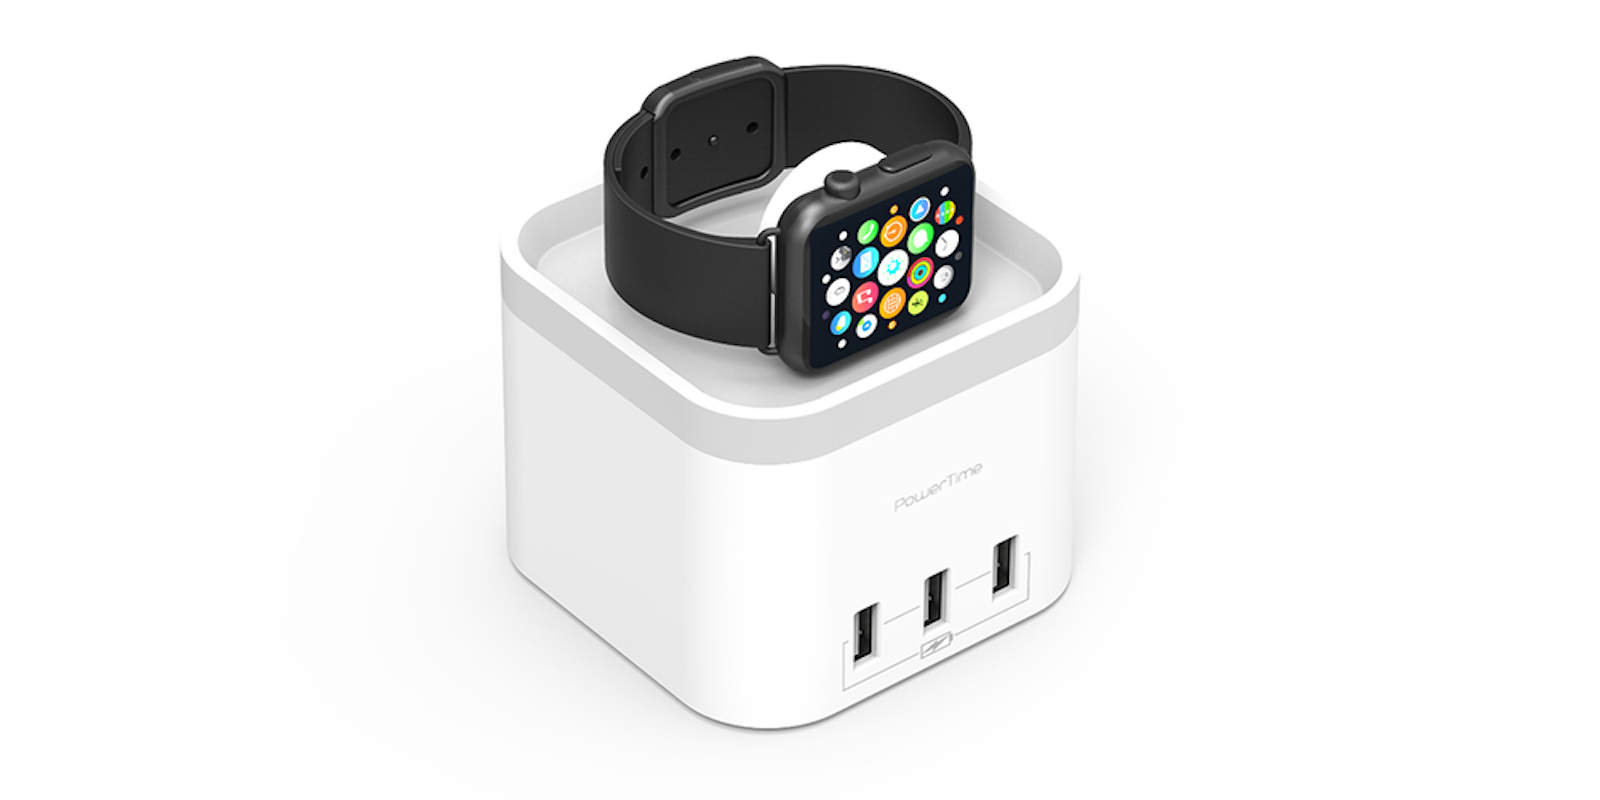 This sleek hub wirelessly recharges your Apple Watch, along with up to 3 USB-connected devices.